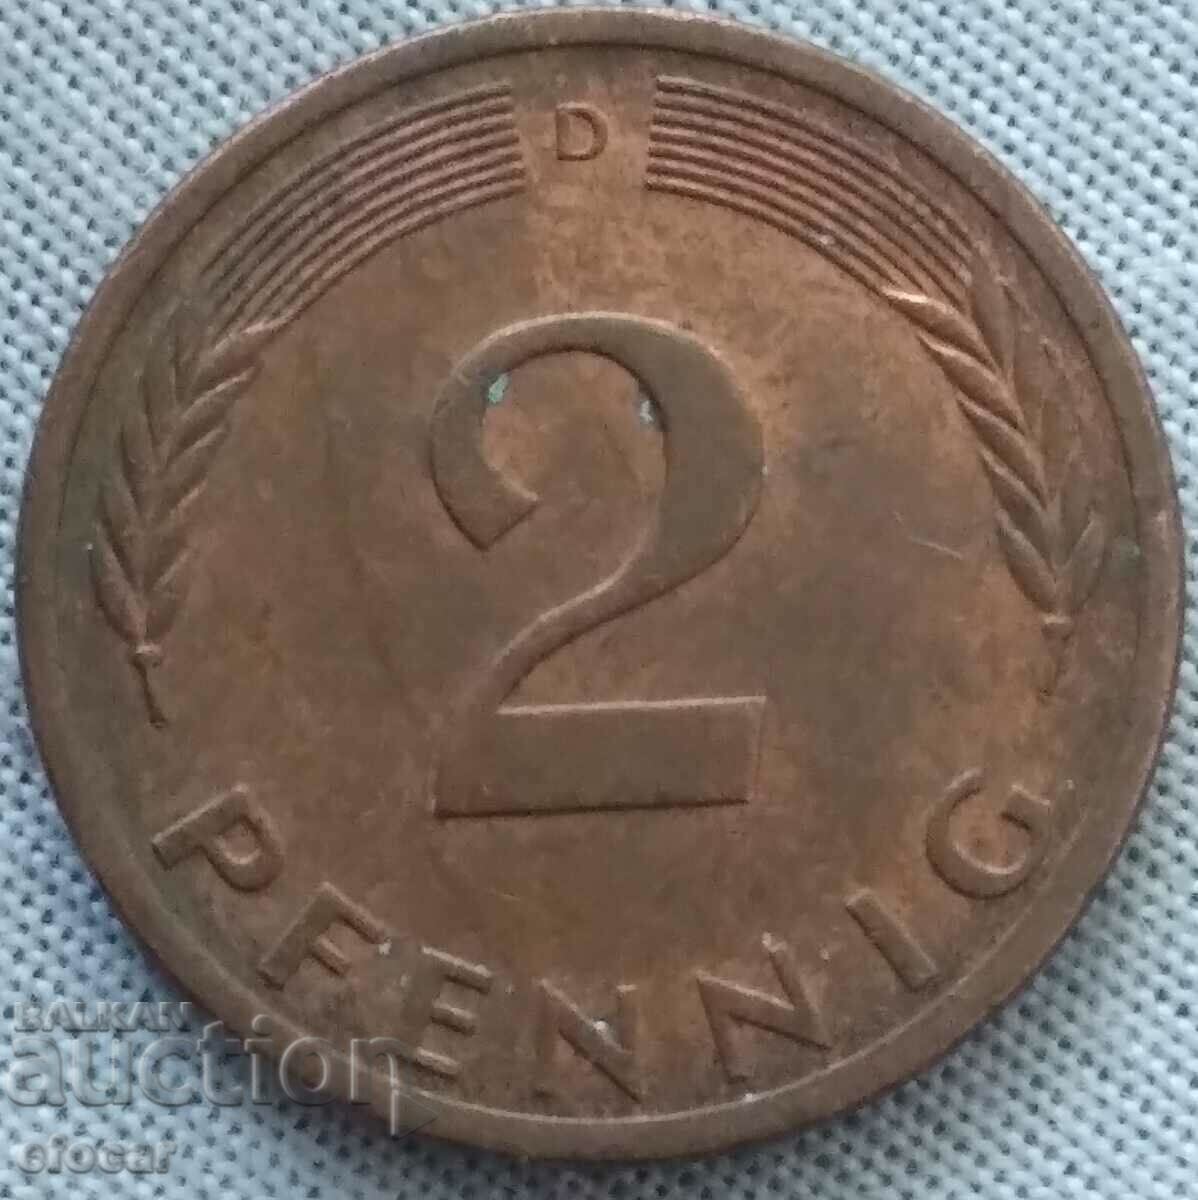 2 Pfenning Germany 1976 letter D